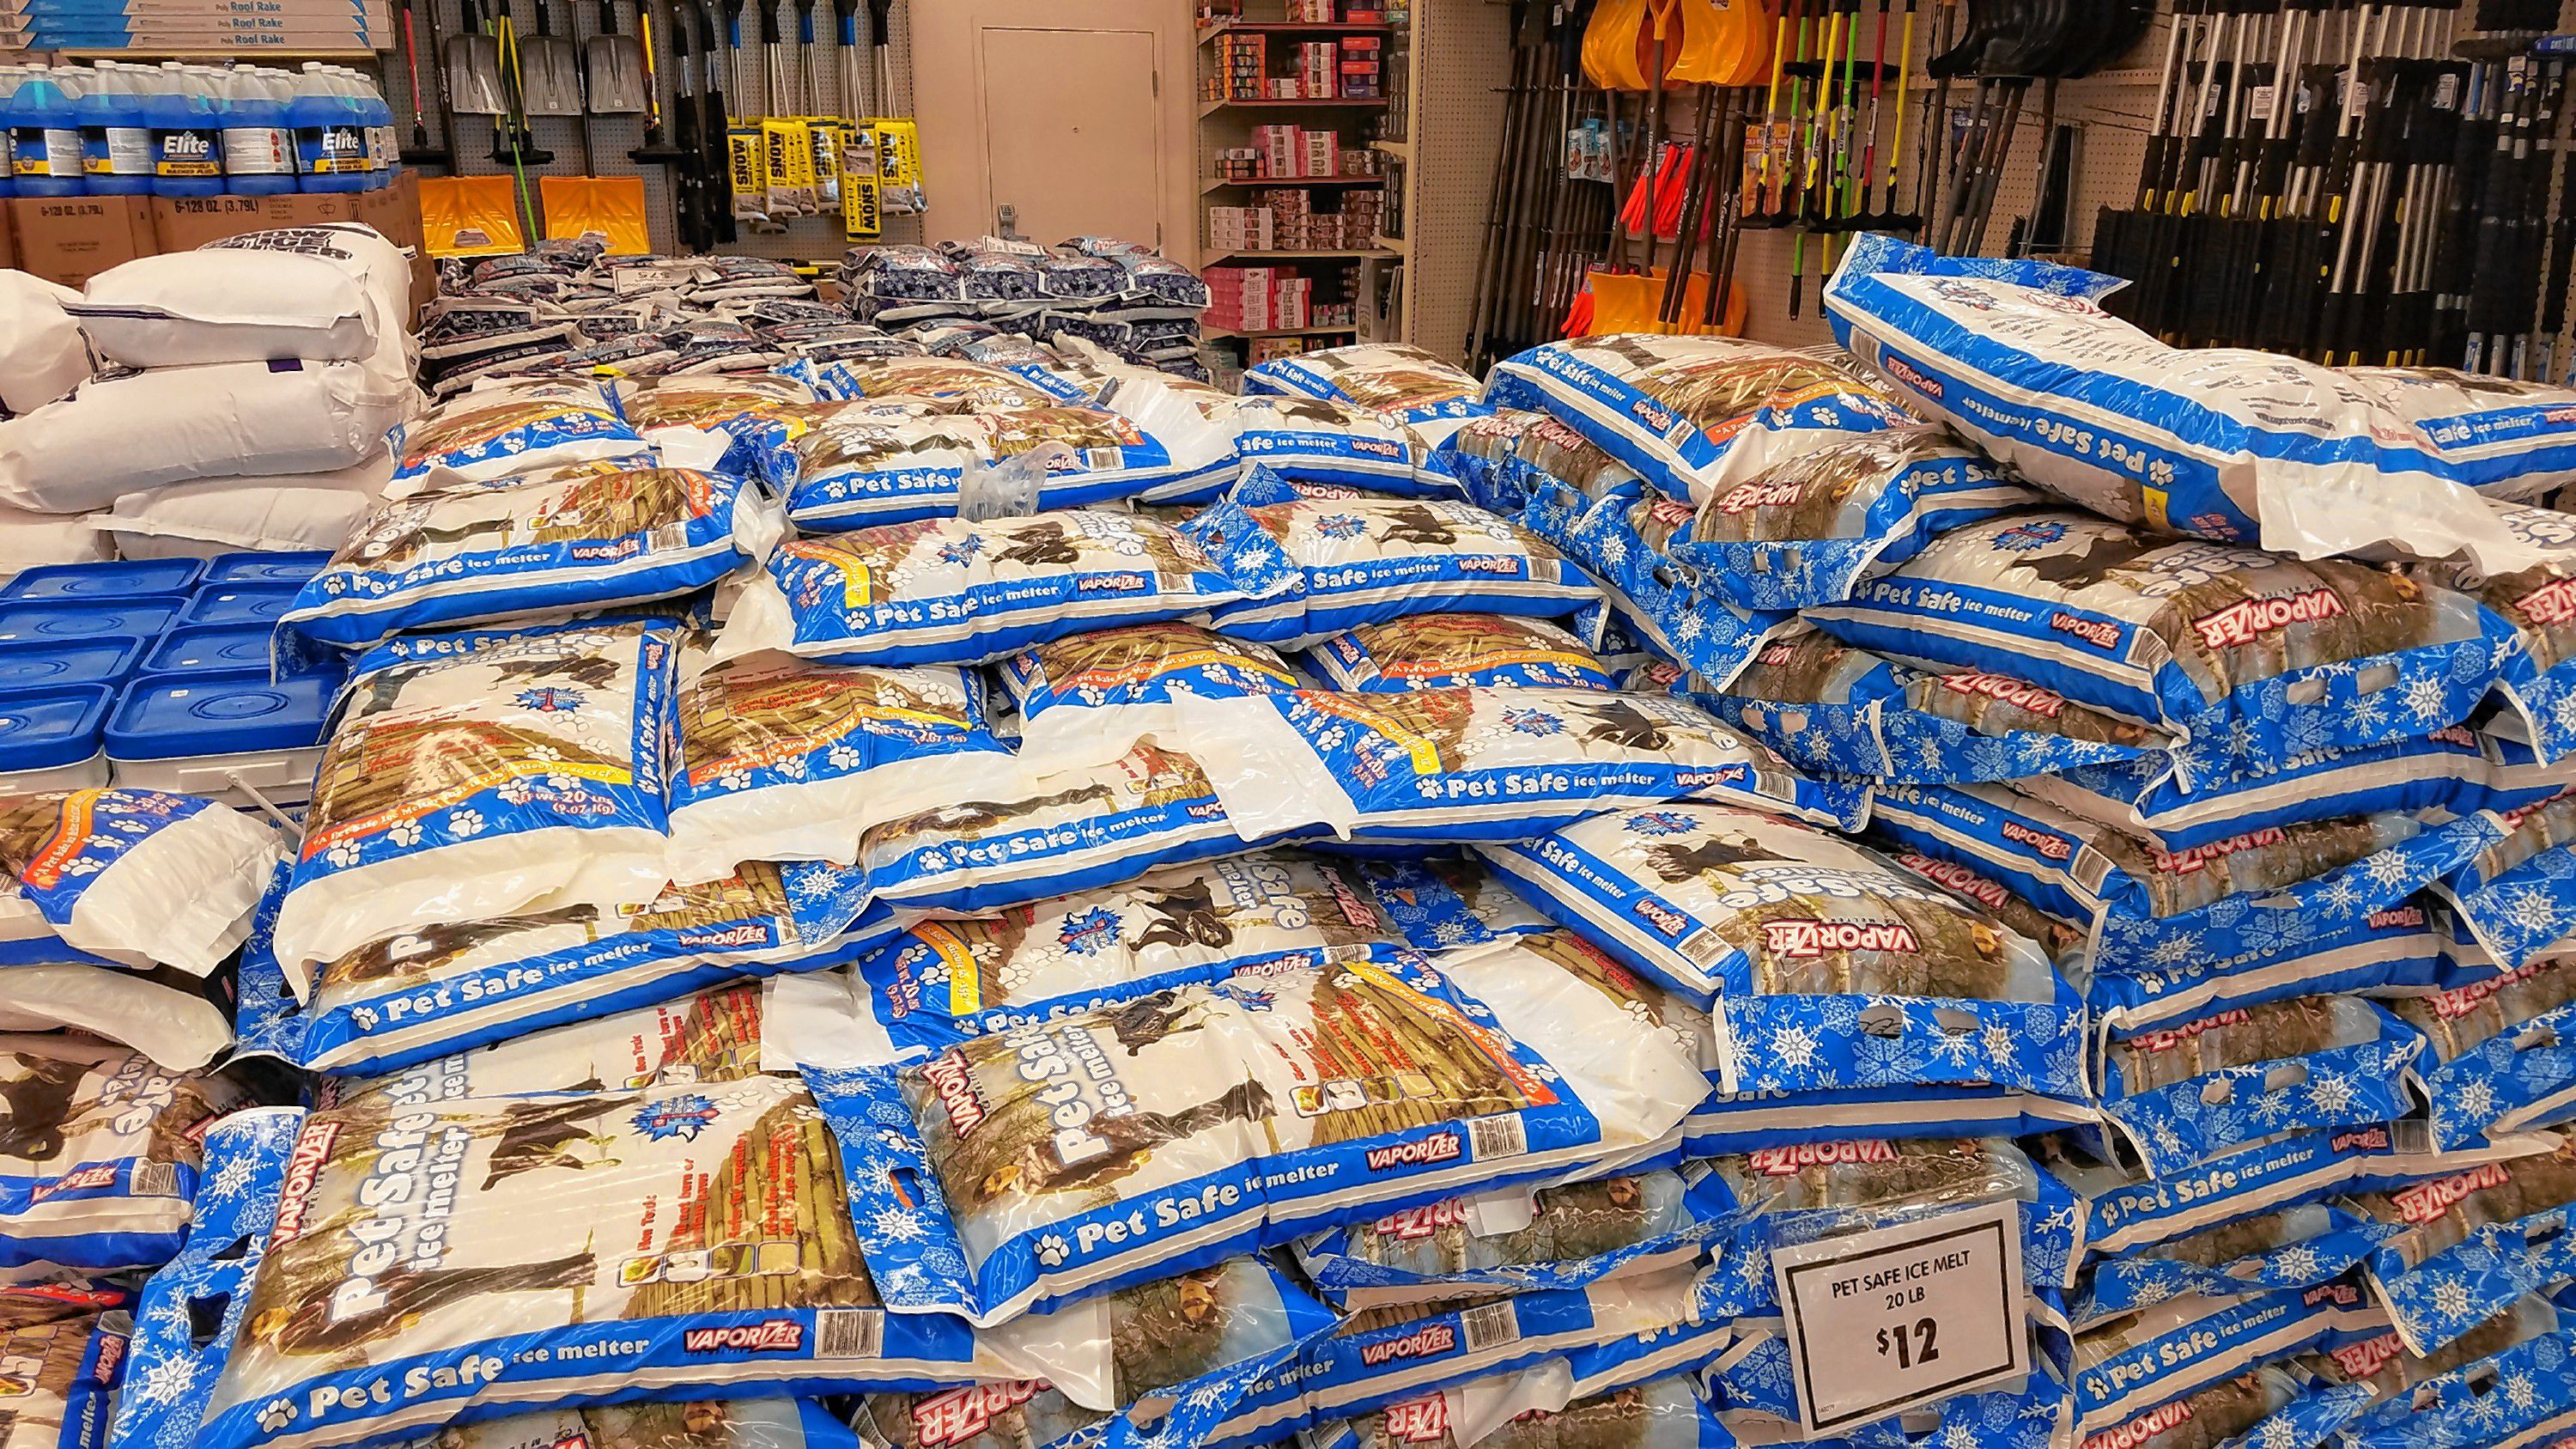 This is the perfect time to stock up on your ice melt, and Ocean State Job Lot has literally tons of it in stock.   JON BODELL / Insider staff